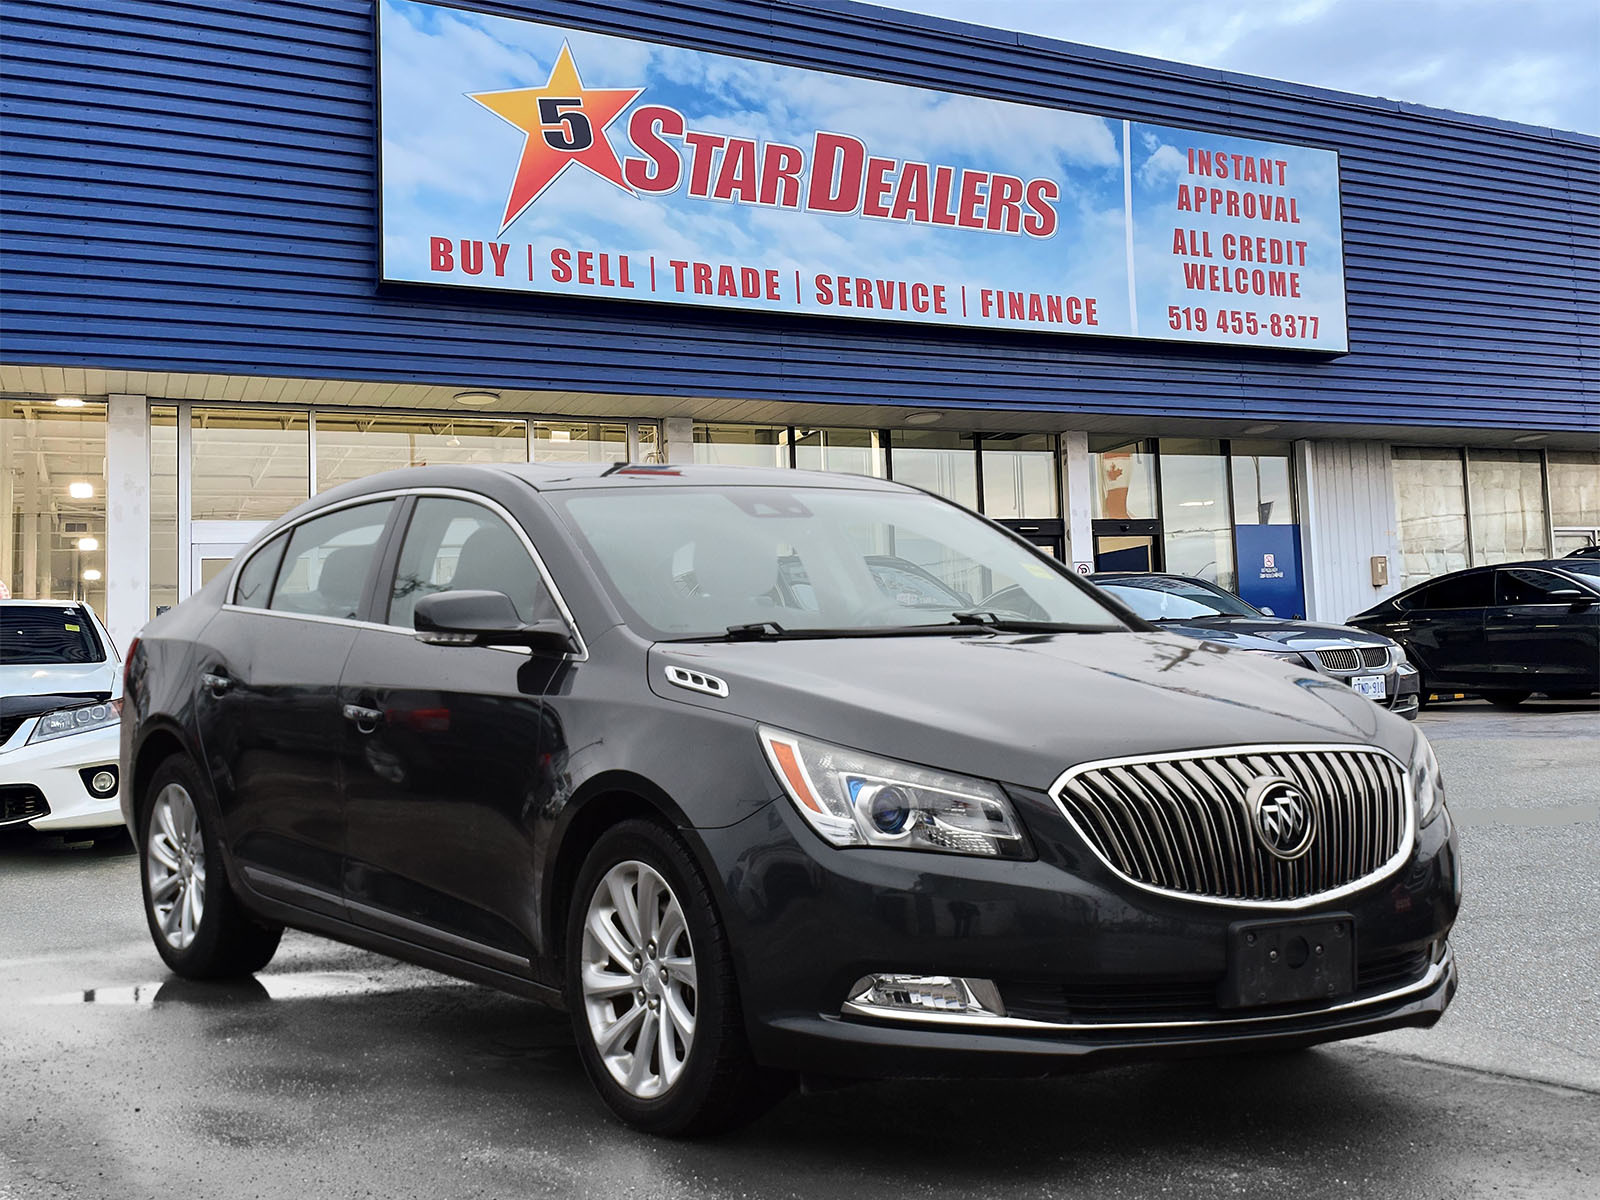 2014 Buick LaCrosse LEATHER NAV SUNROOF P/H-SEATS MINT CONDITION! 